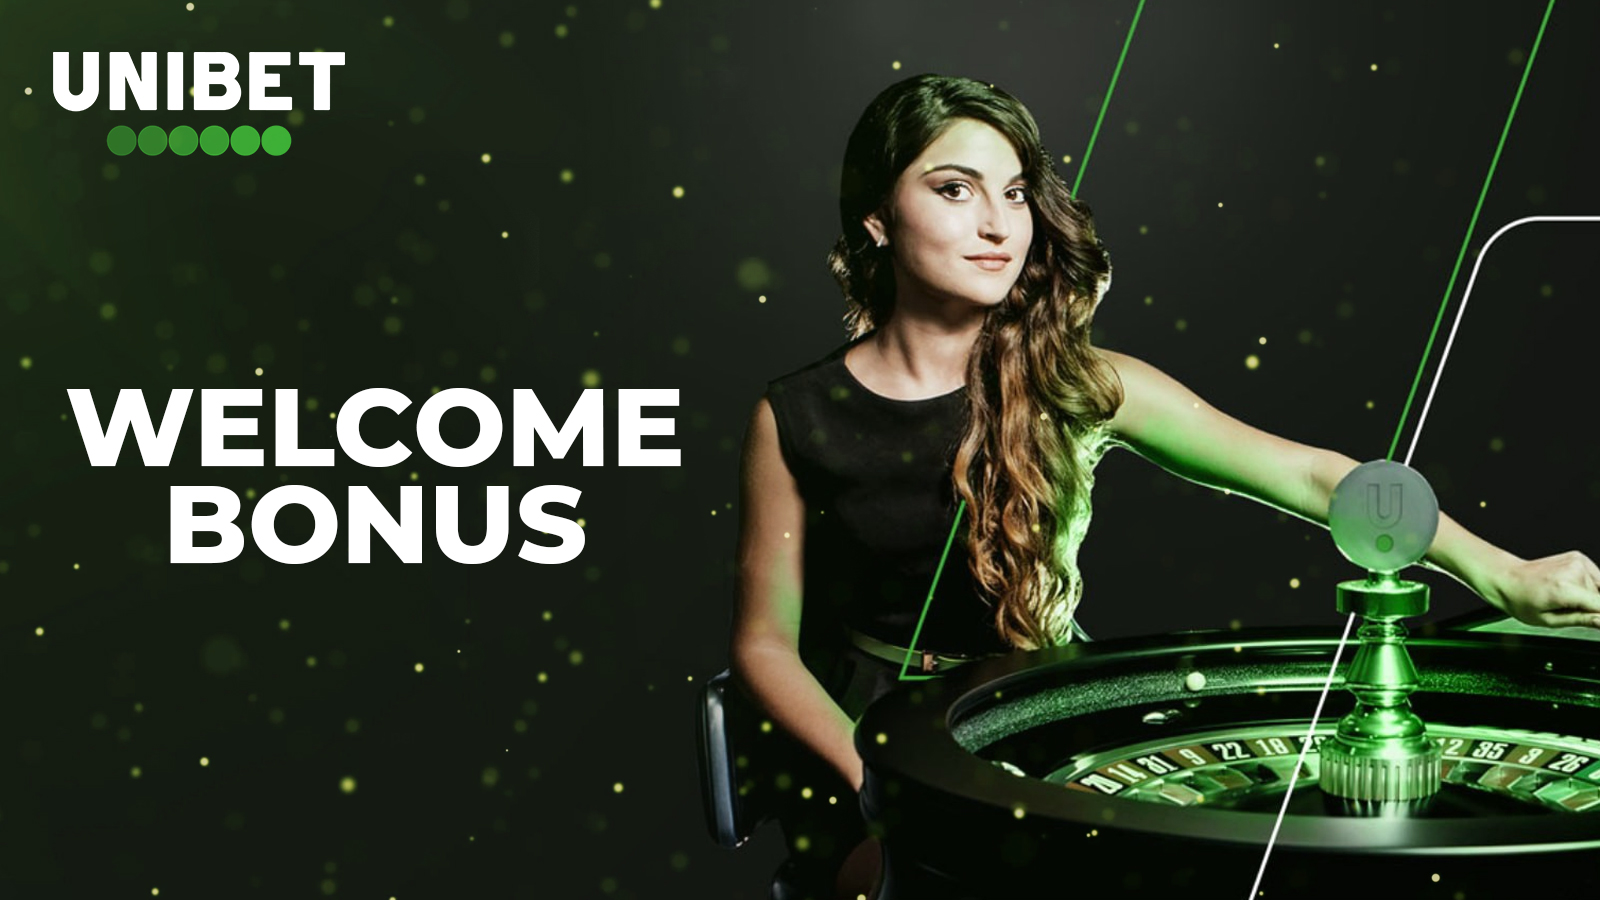 Sign up for Unbet and get welcome bonuses for newcomers.